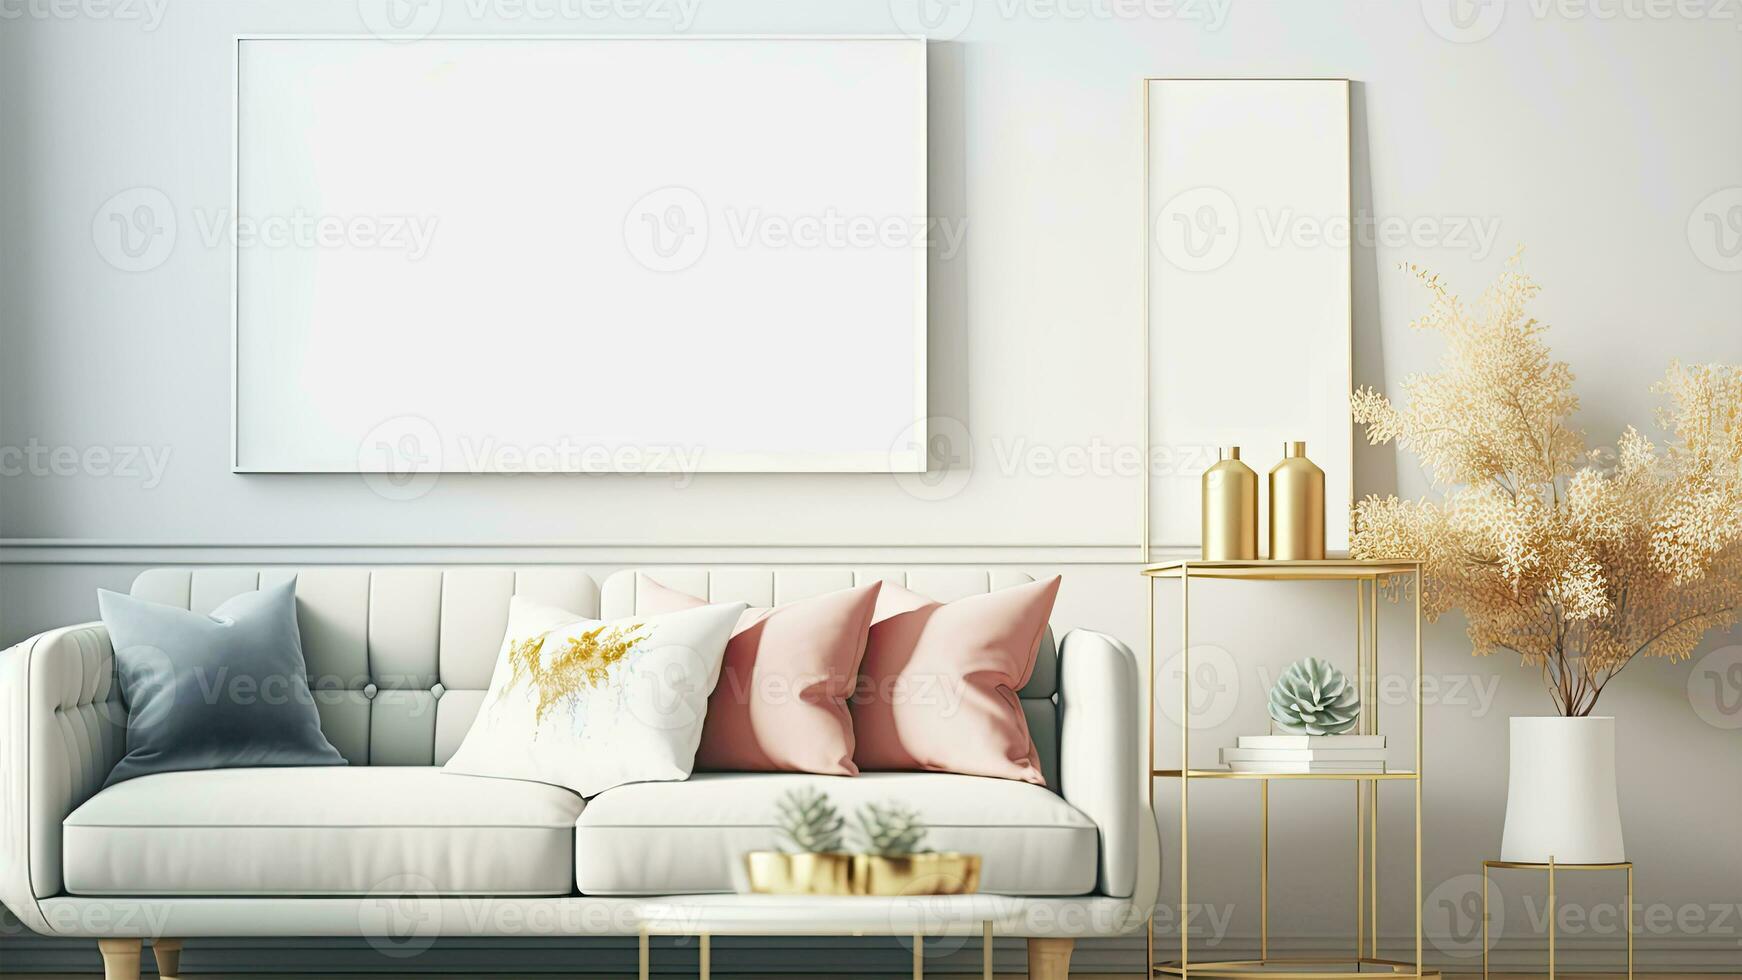 3D Render of Minimalist Living Room Interior Mockup With Velvet Cushions On Lounger Sofa And Image Placeholder Frames On Wall. photo